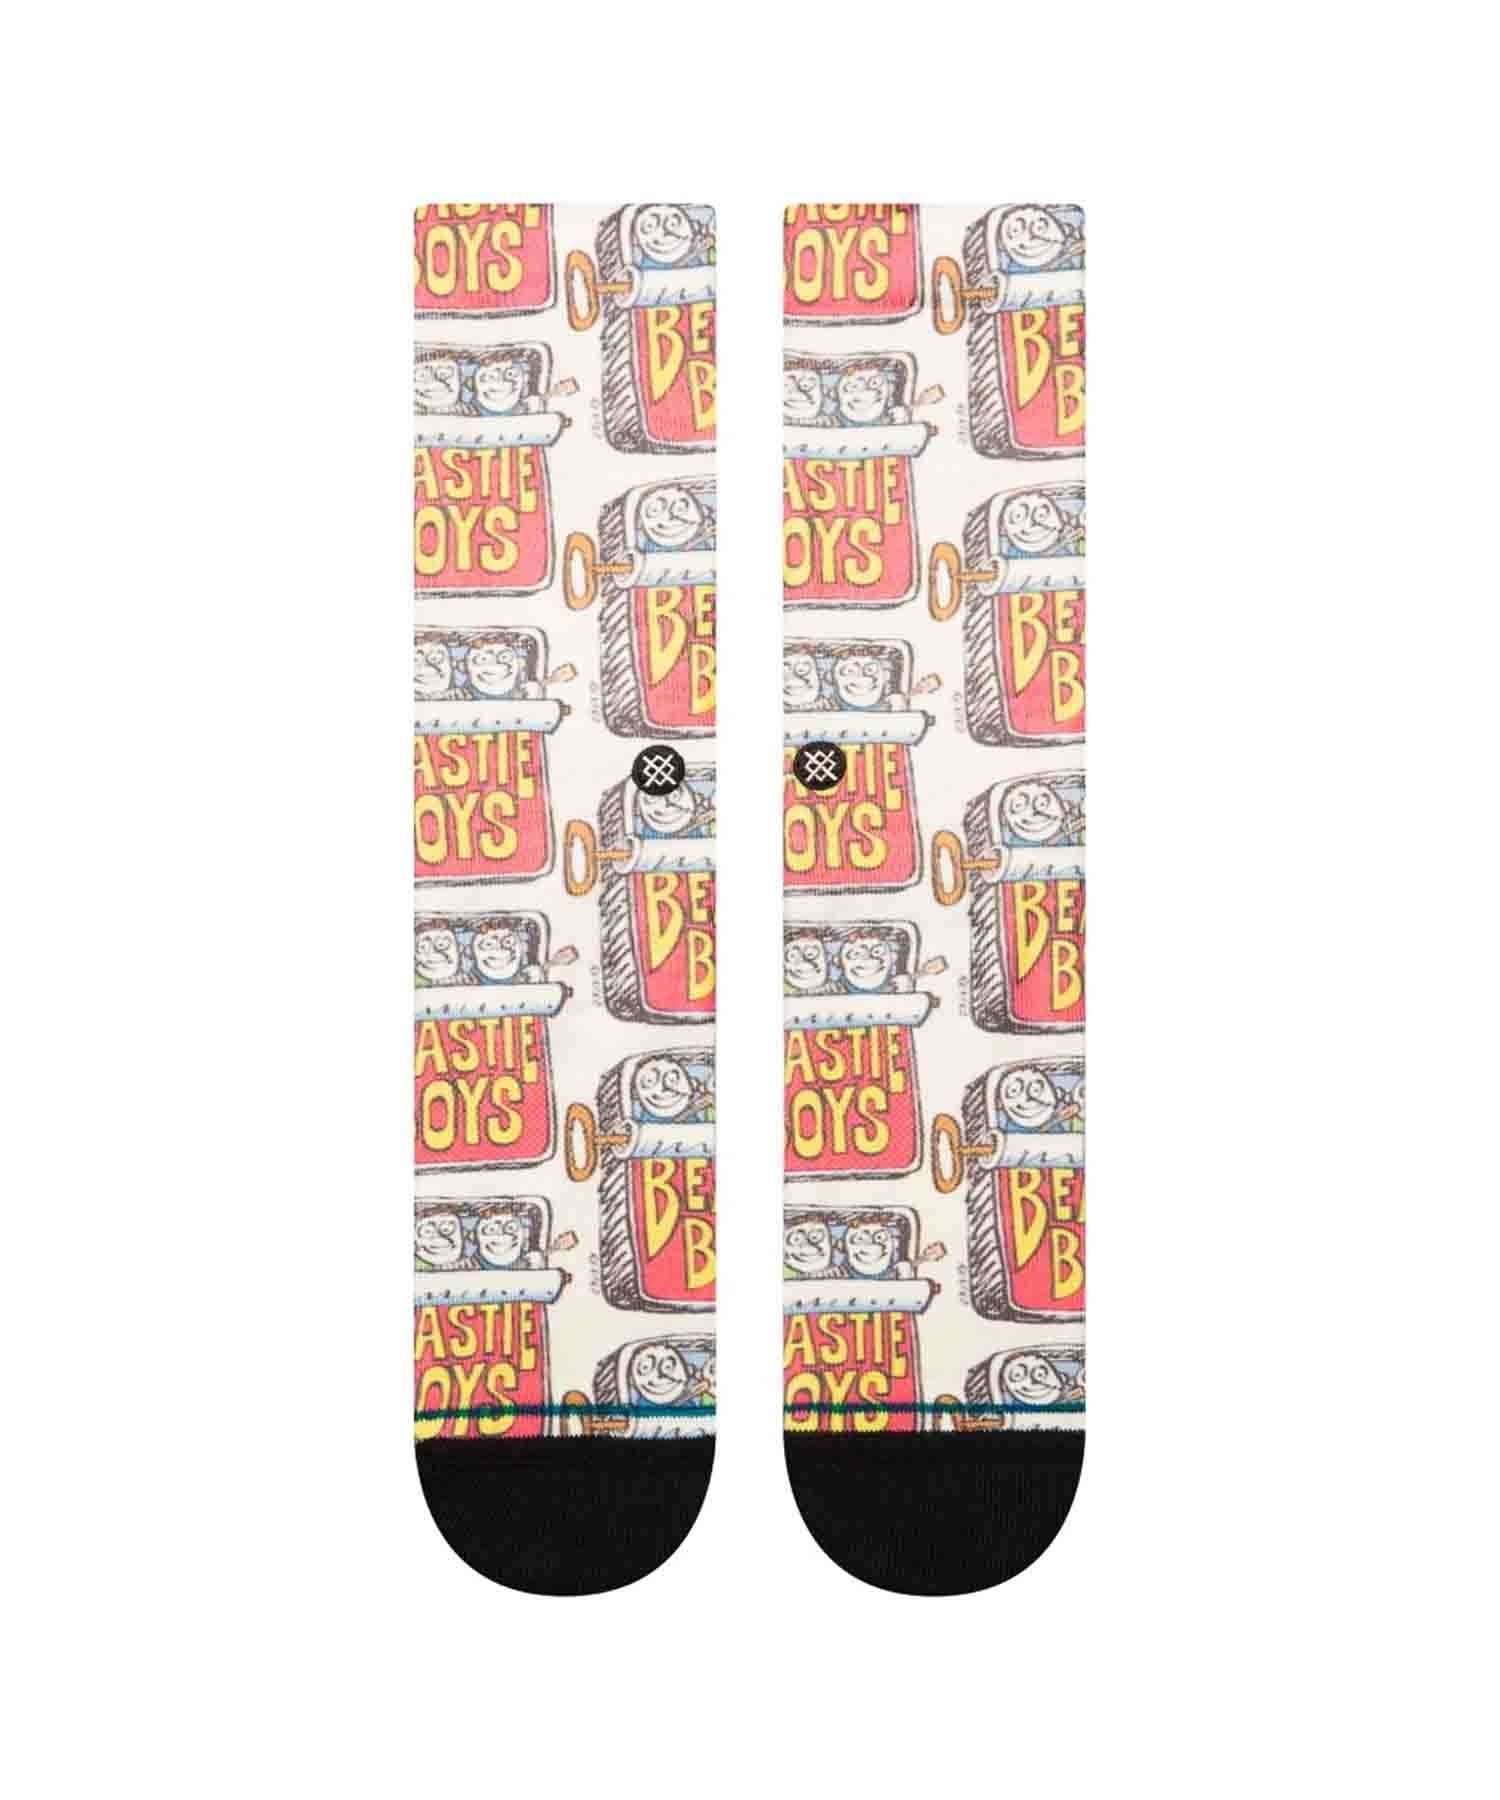 STANCE/スタンス ソックス 靴下 CANNED BEASTIE BOYS ビースティ・ボーイズ コラボモデル A555D23CAN(OFW-L)